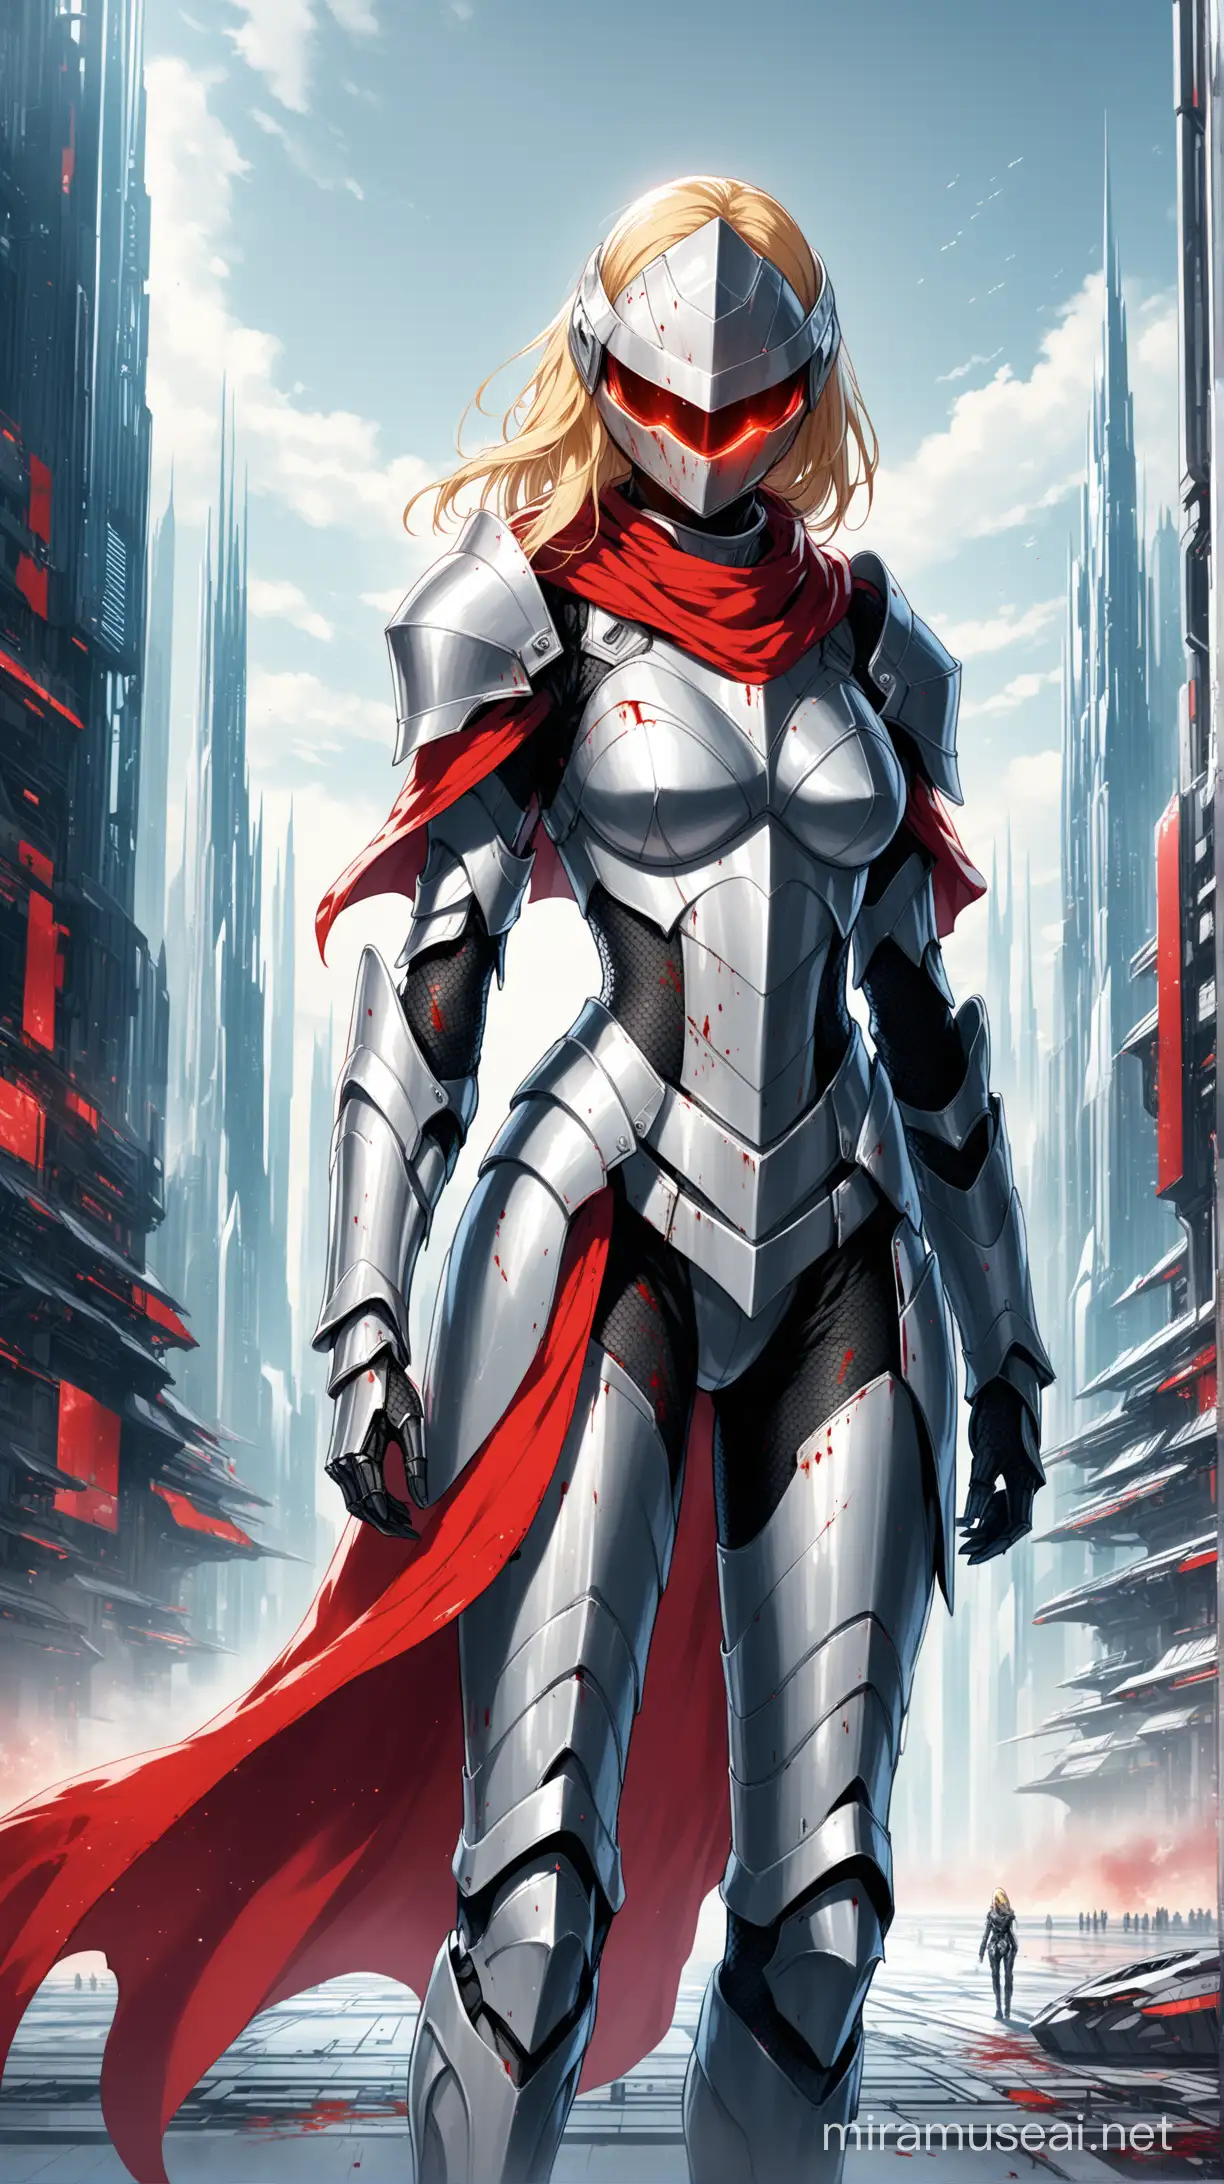 a young woman, blonde hair, wearing silver futuristic knight armour, silver full-face helmet, blood red cape, standing in a futuristic city